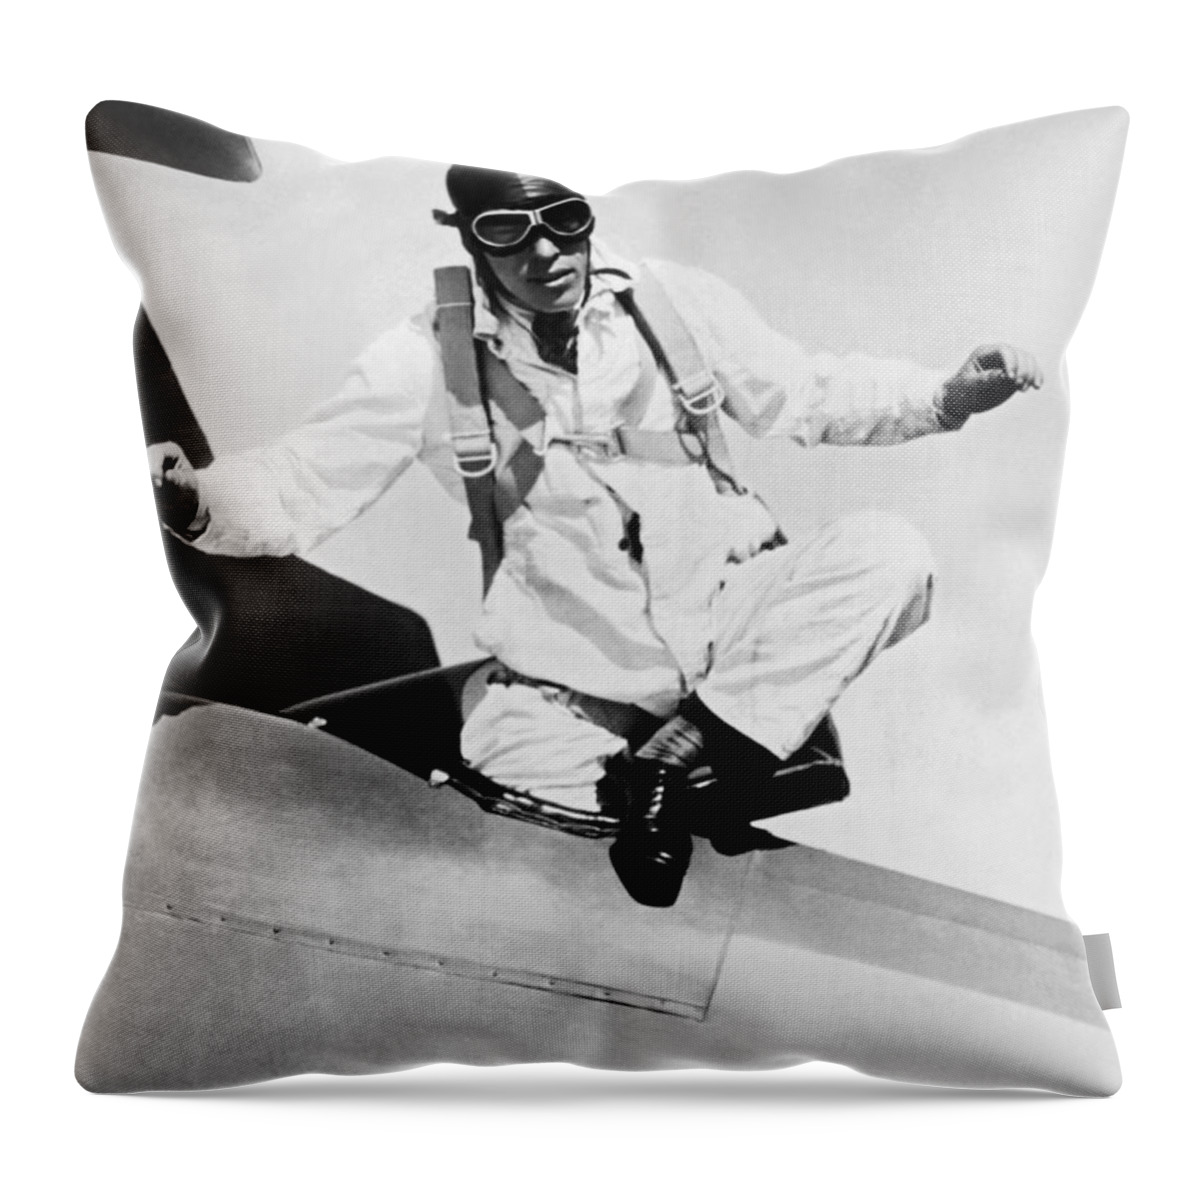 1 Person Throw Pillow featuring the photograph Hopes To Set Free Fall Record by Underwood Archives